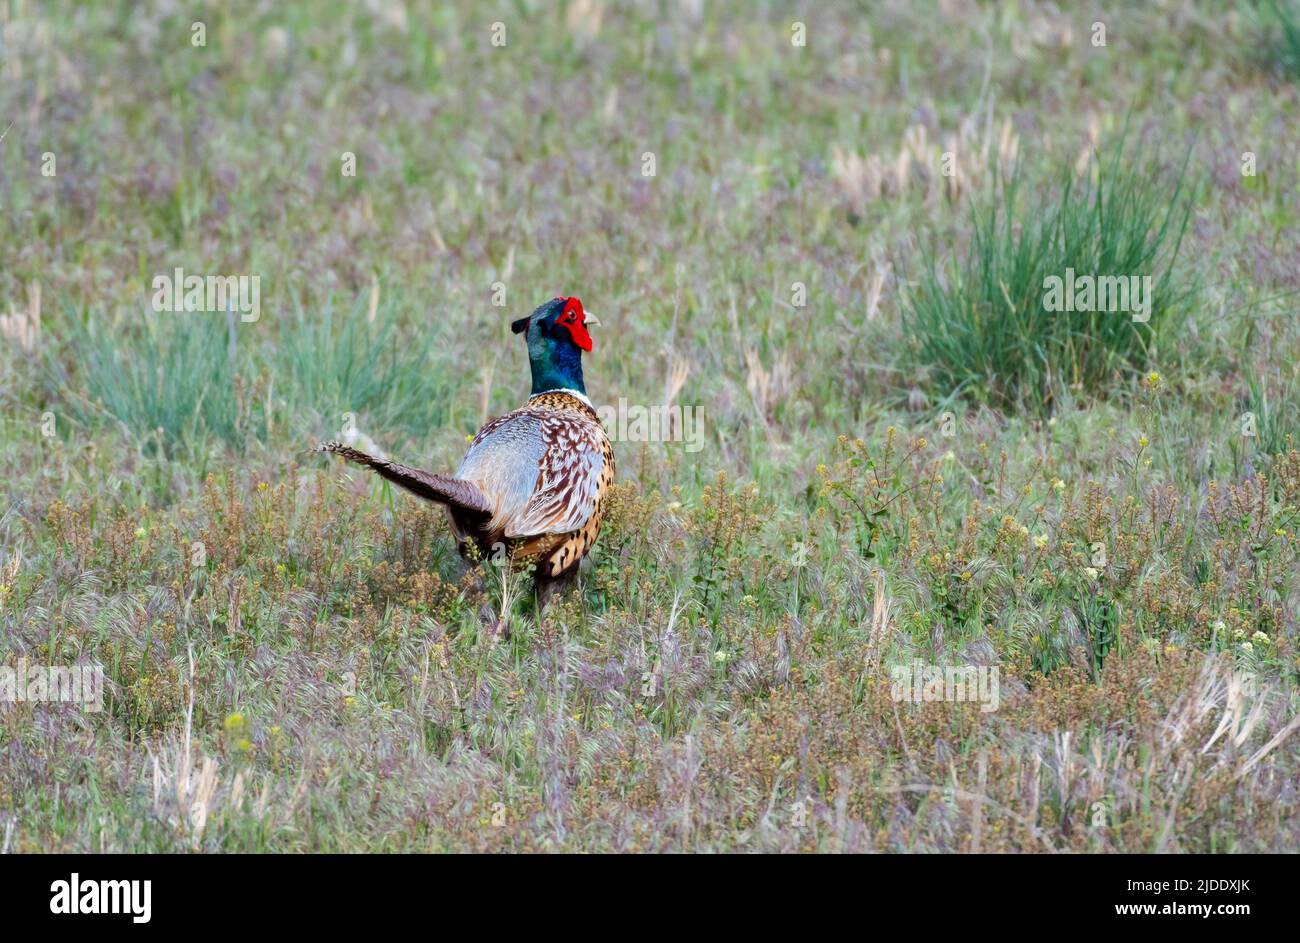 Colorful Ring-necked Pheasant, Phasianus colchicus, walking away in a field. Bird in wild. Stock Photo